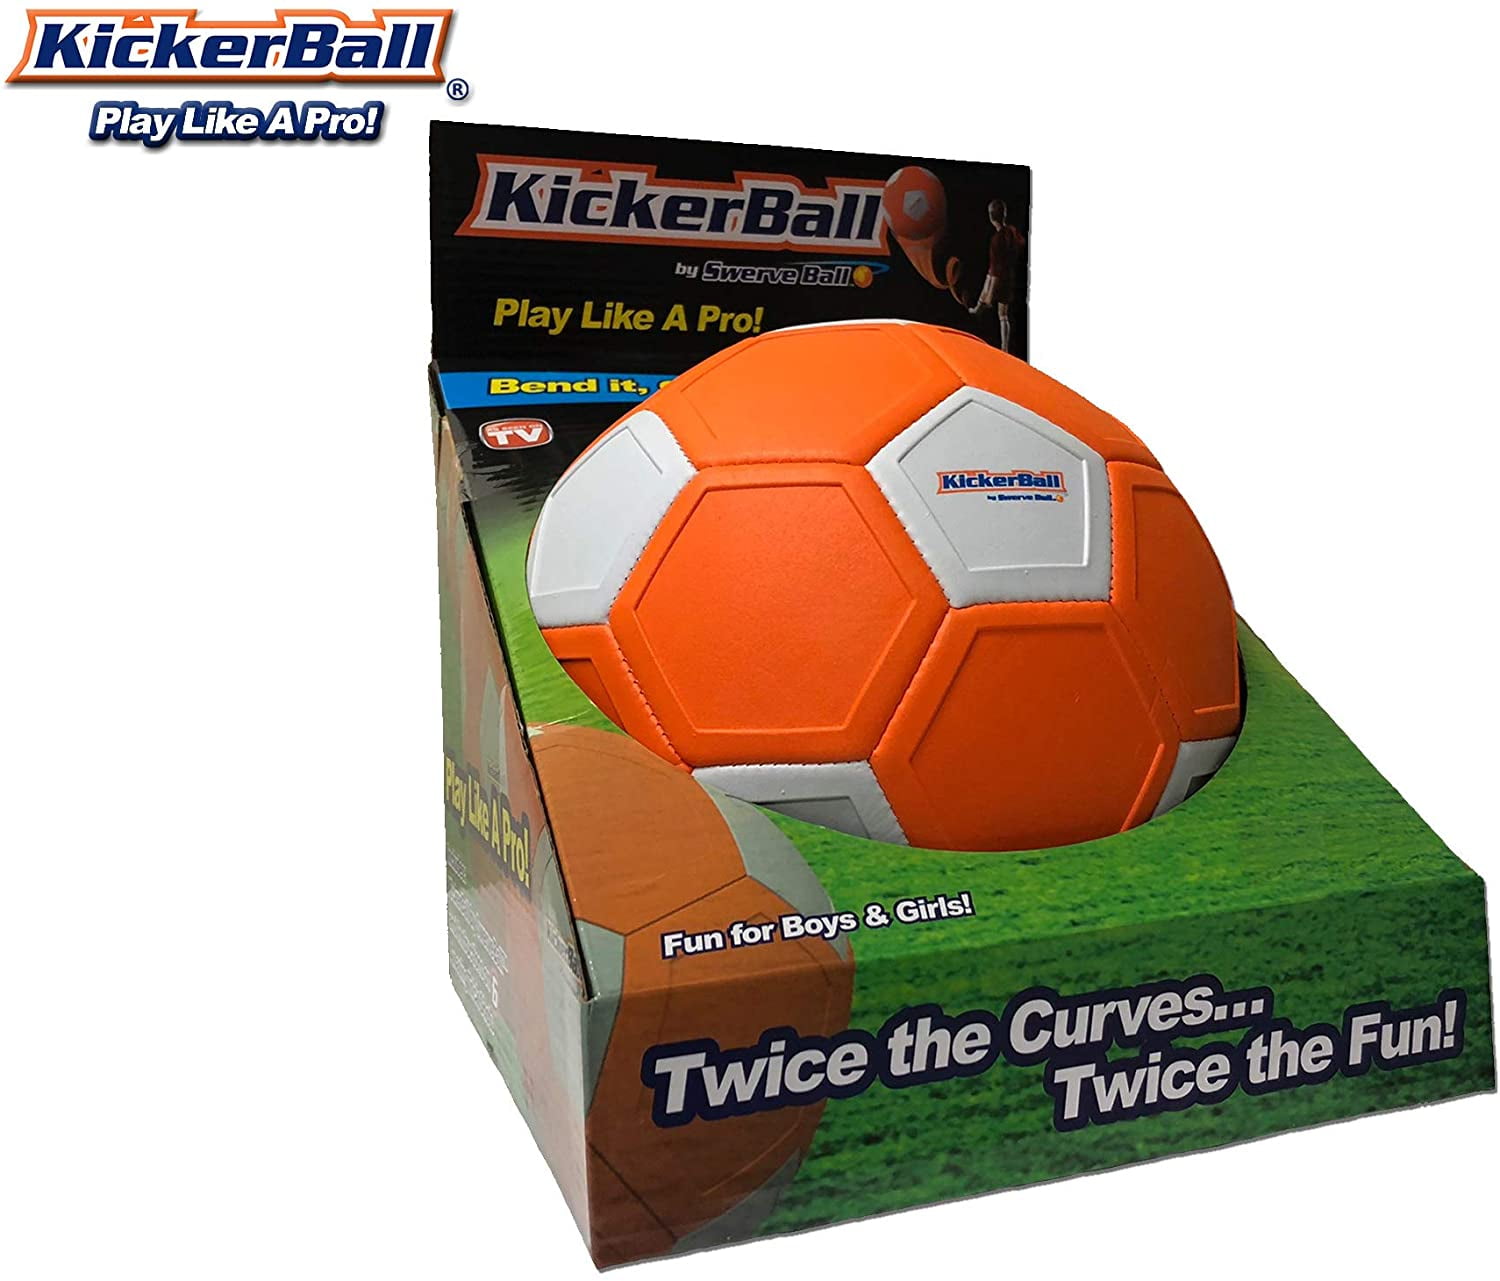 Swerve Bending Curving Ball Best Selling Toy 2018 Kicking Football Soccer Game 